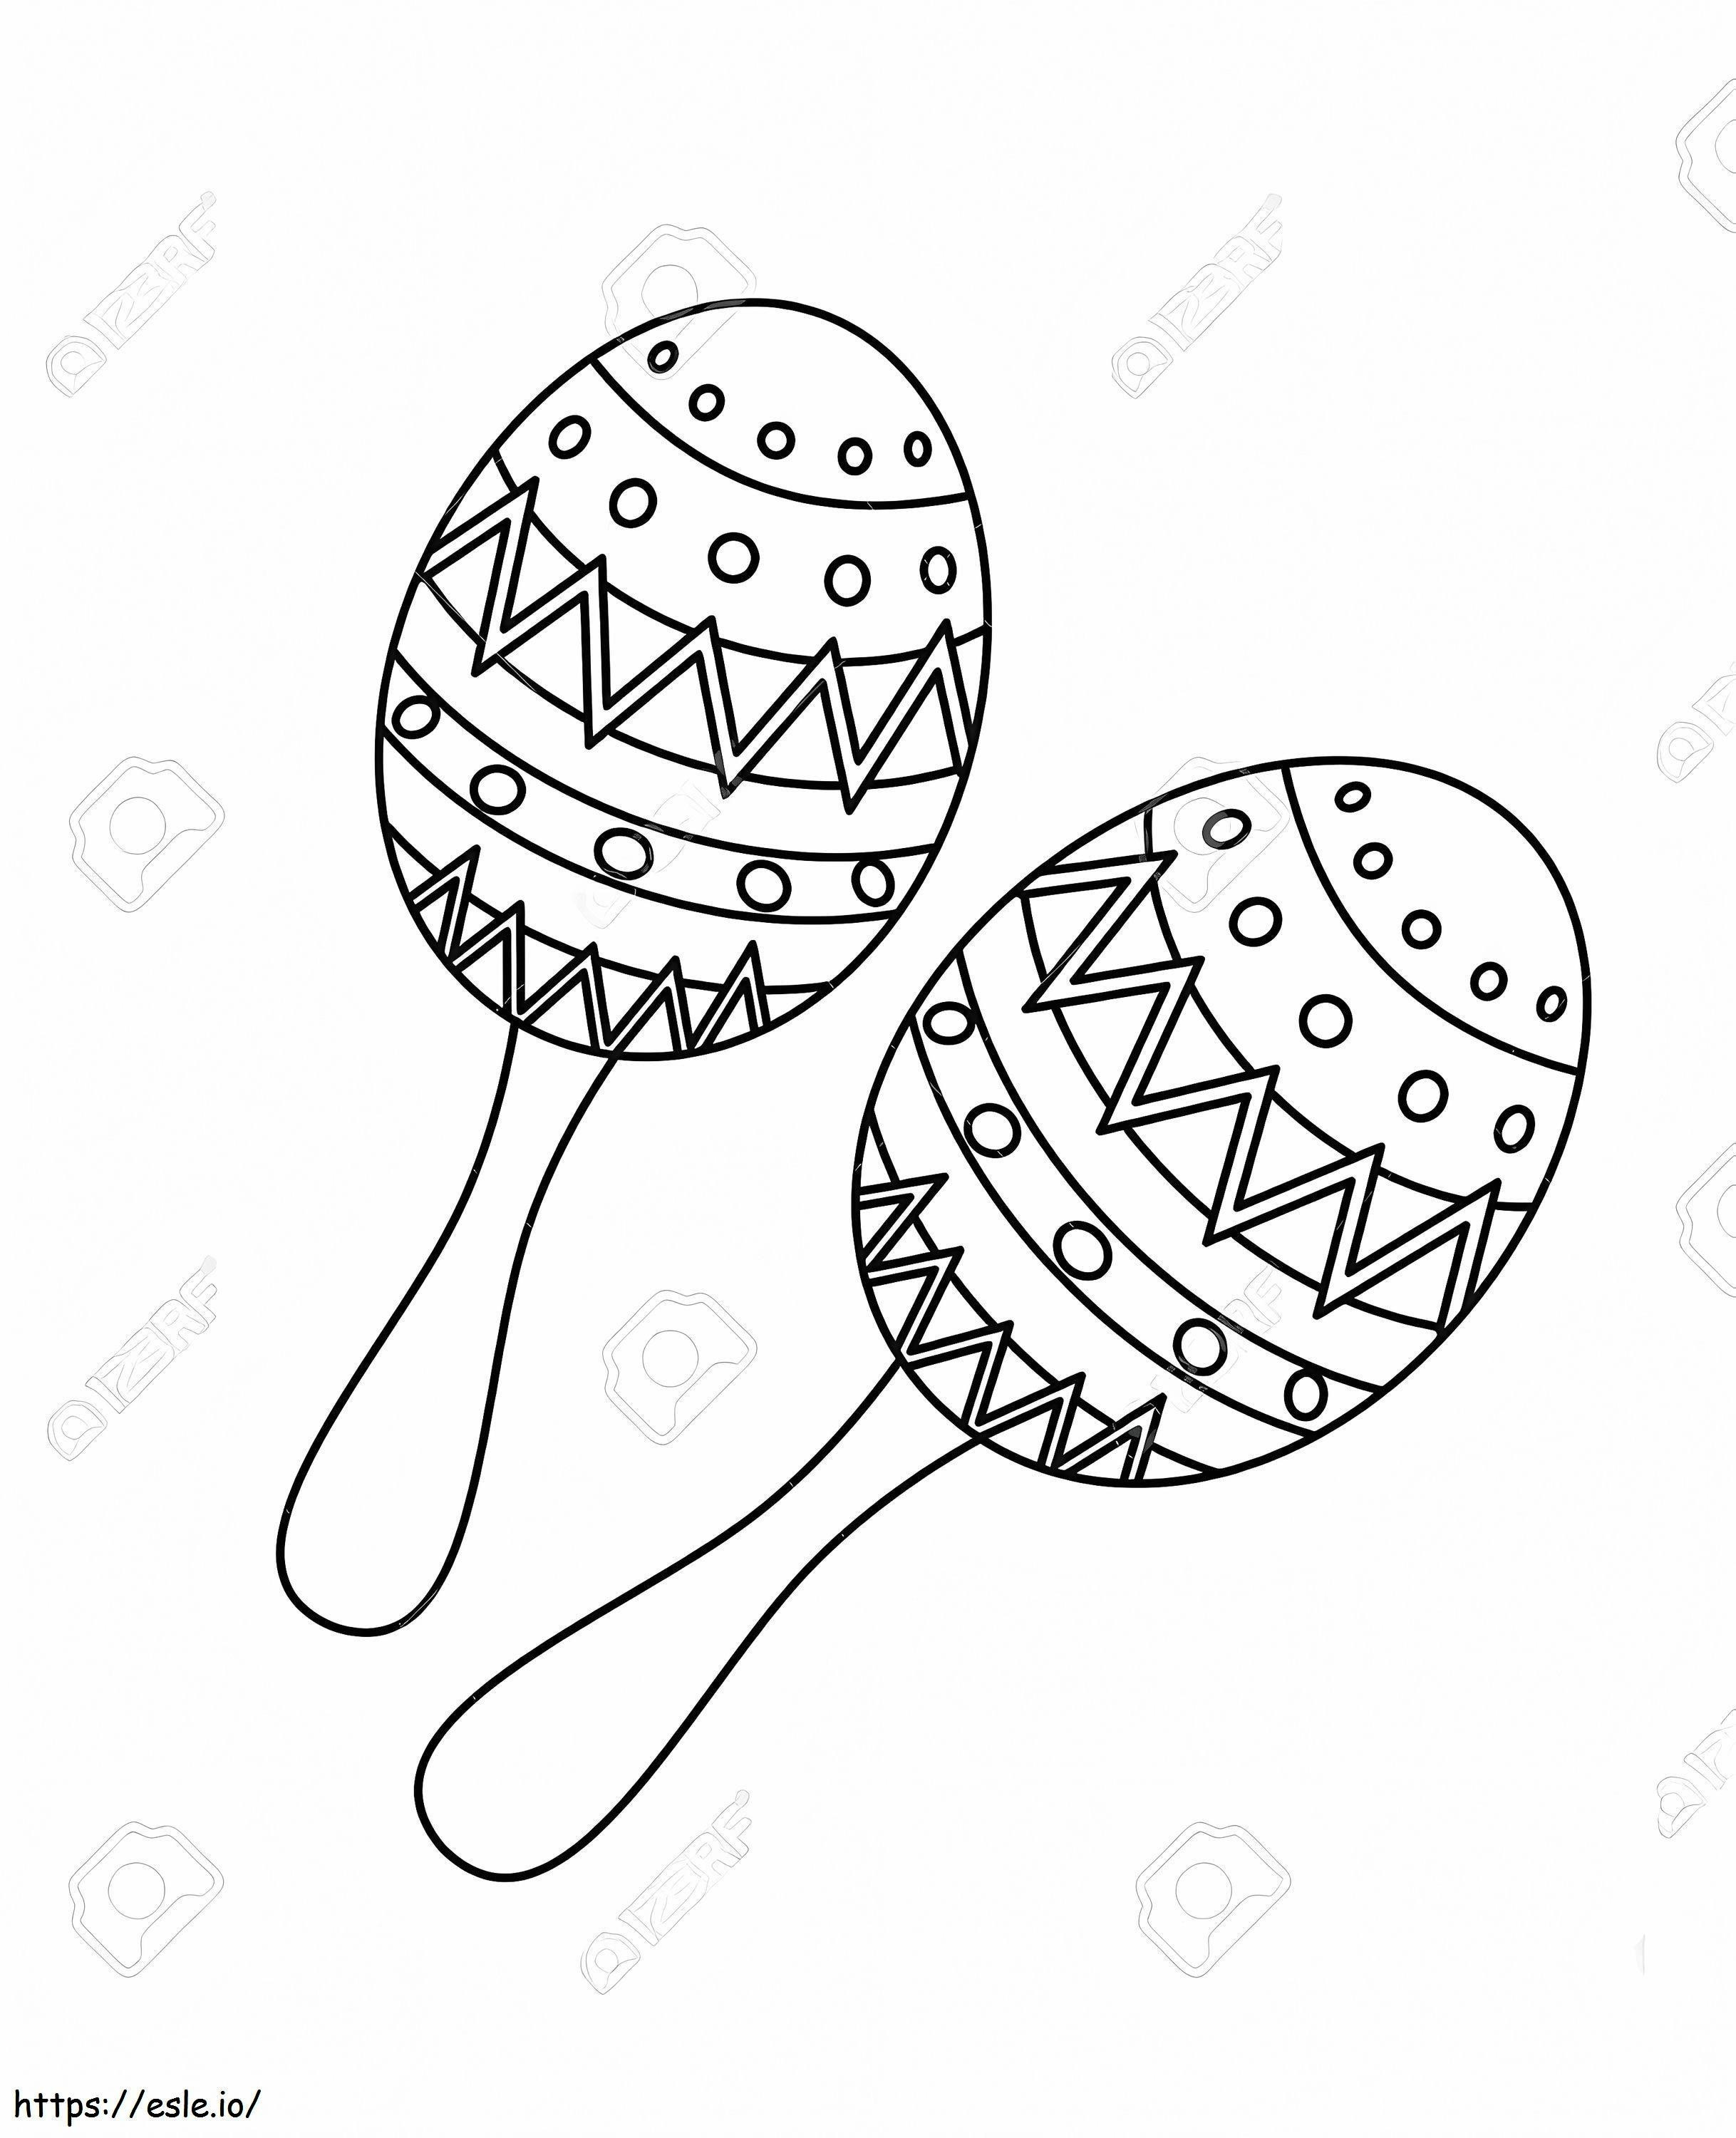 1570500544_65415398 Maracas Icon In Outline Style Isolated On White Background Musical Instruments Symbol Vector Illustr coloring page